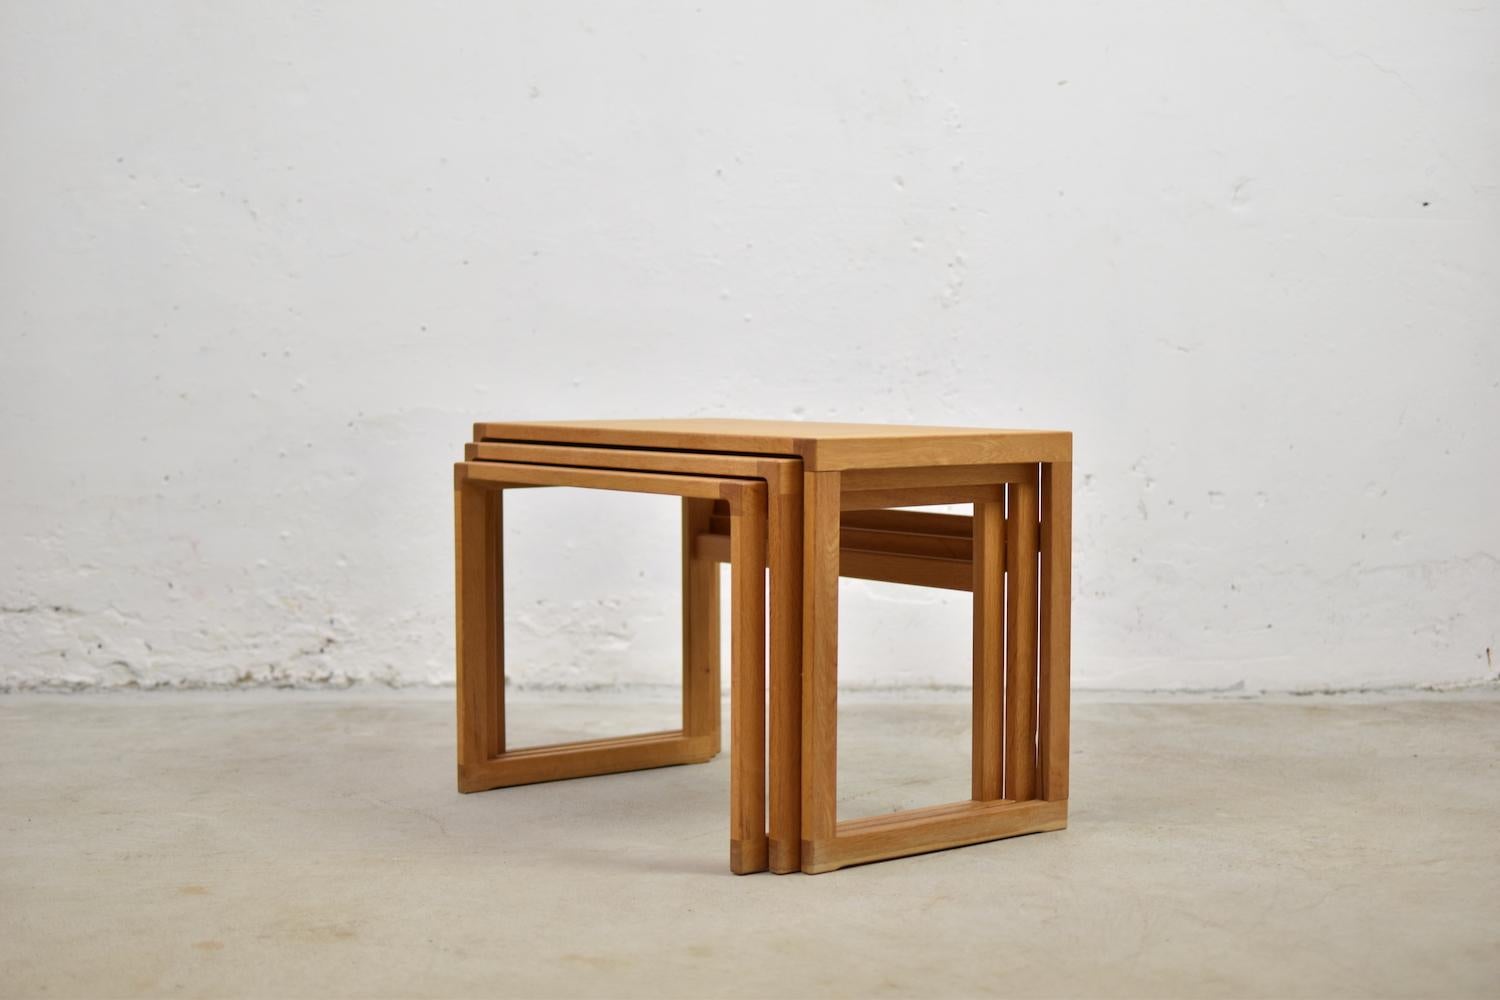 Lovely set of three nesting tables by Kai Kristiansen for Vildbjerg Møbelfabrik, Denmark, 1950s. This set is made out of oak. Clean lines. Professionally restored!